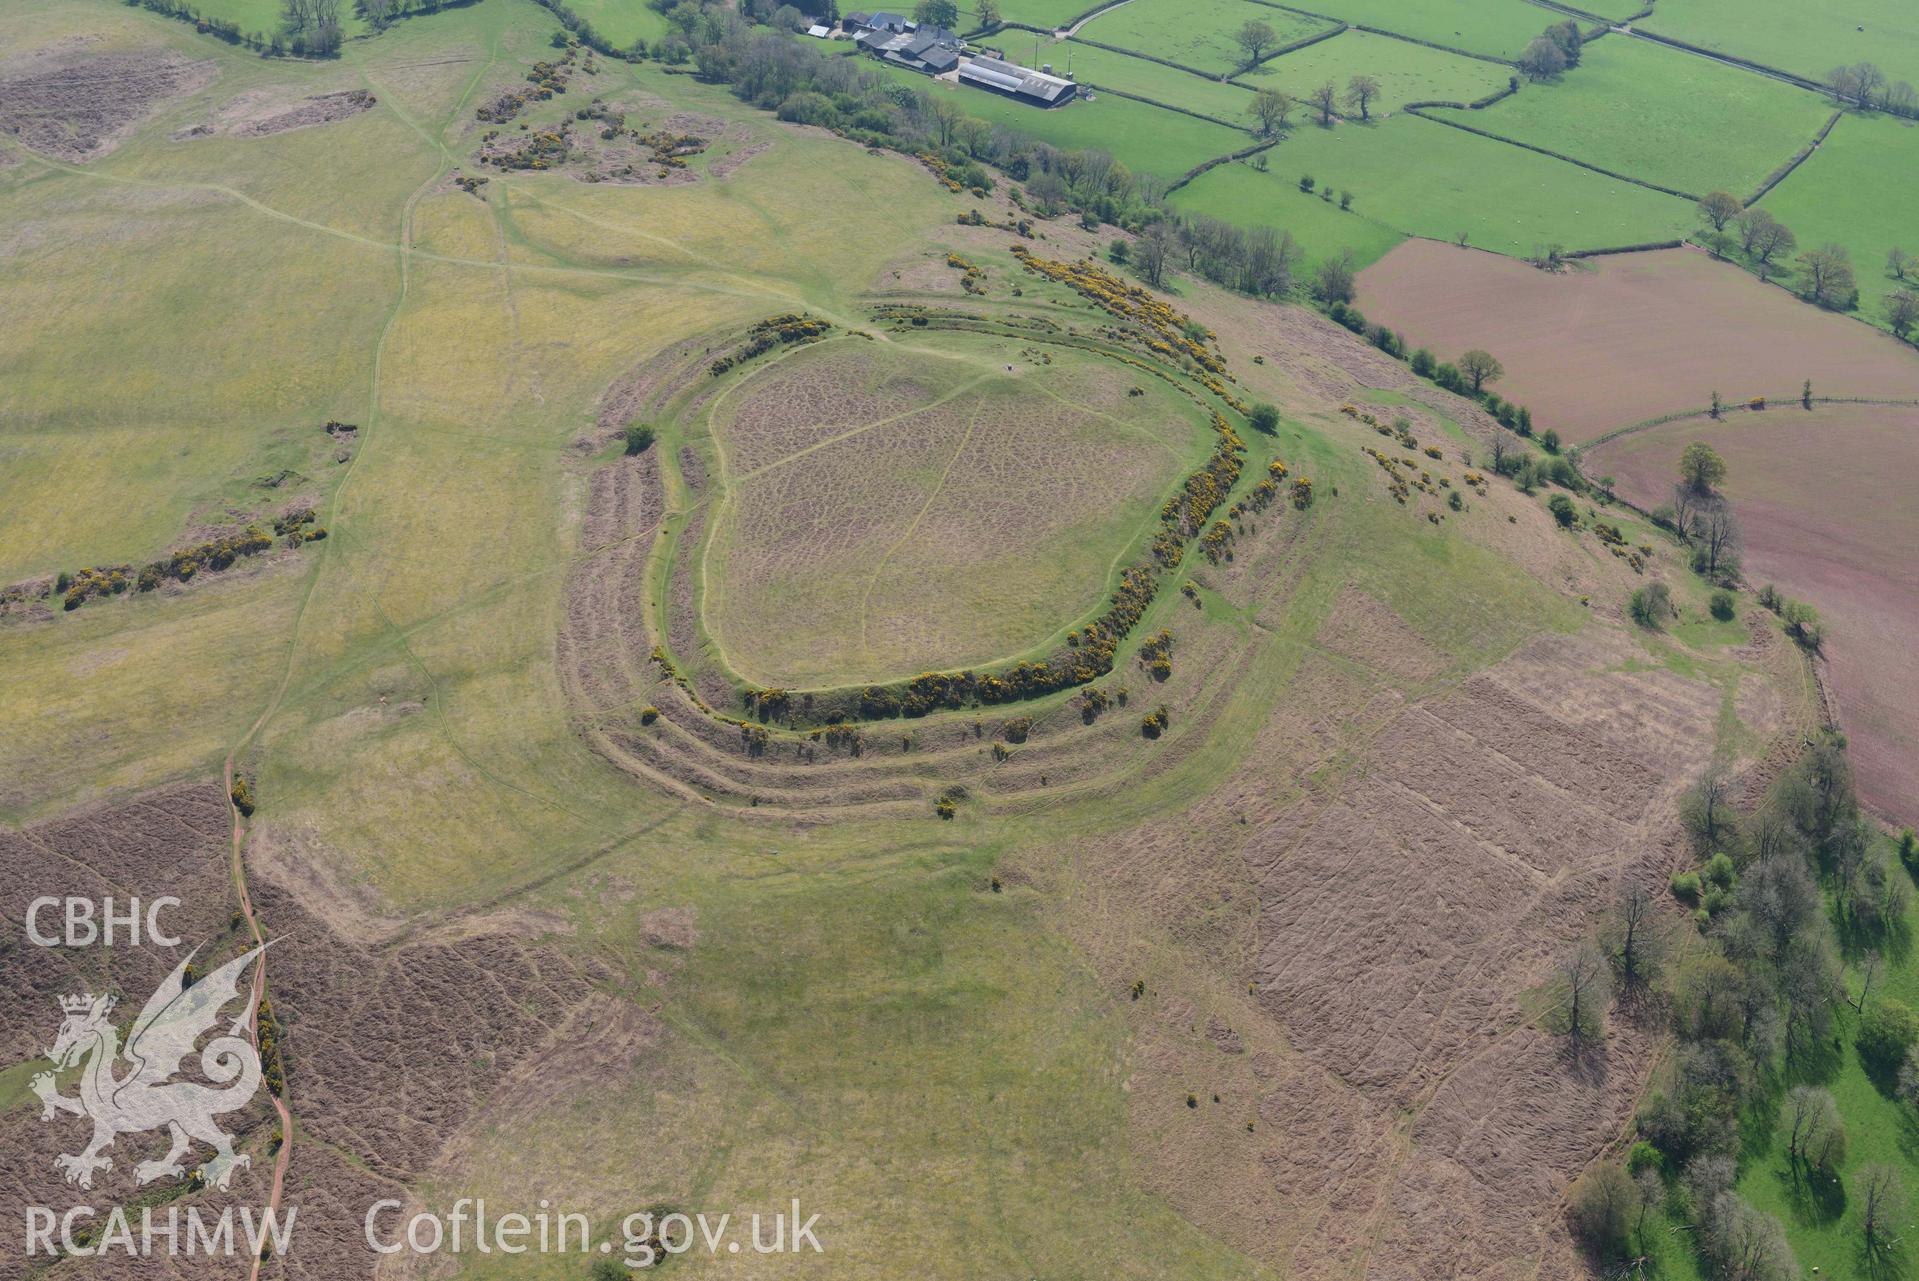 Pen-y-Crug Hillfort, near Brecon. Oblique aerial photograph taken during the Royal Commission's programme of archaeological aerial reconnaissance by Toby Driver on 29 April 2022.